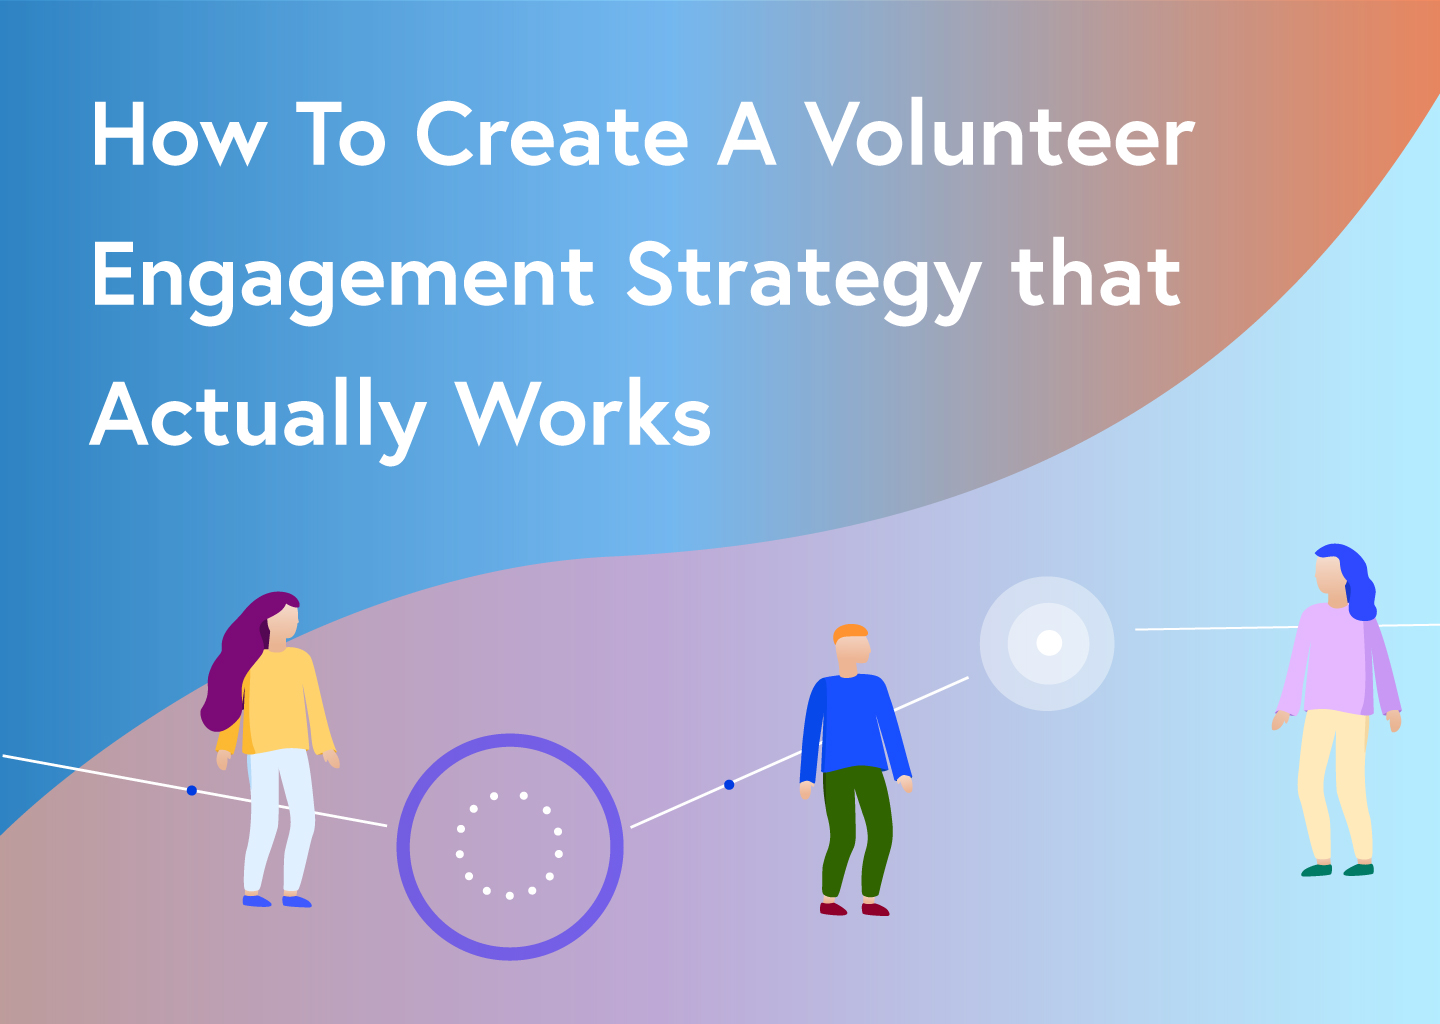 How To Create A Volunteer Engagement Strategy that Actually Works